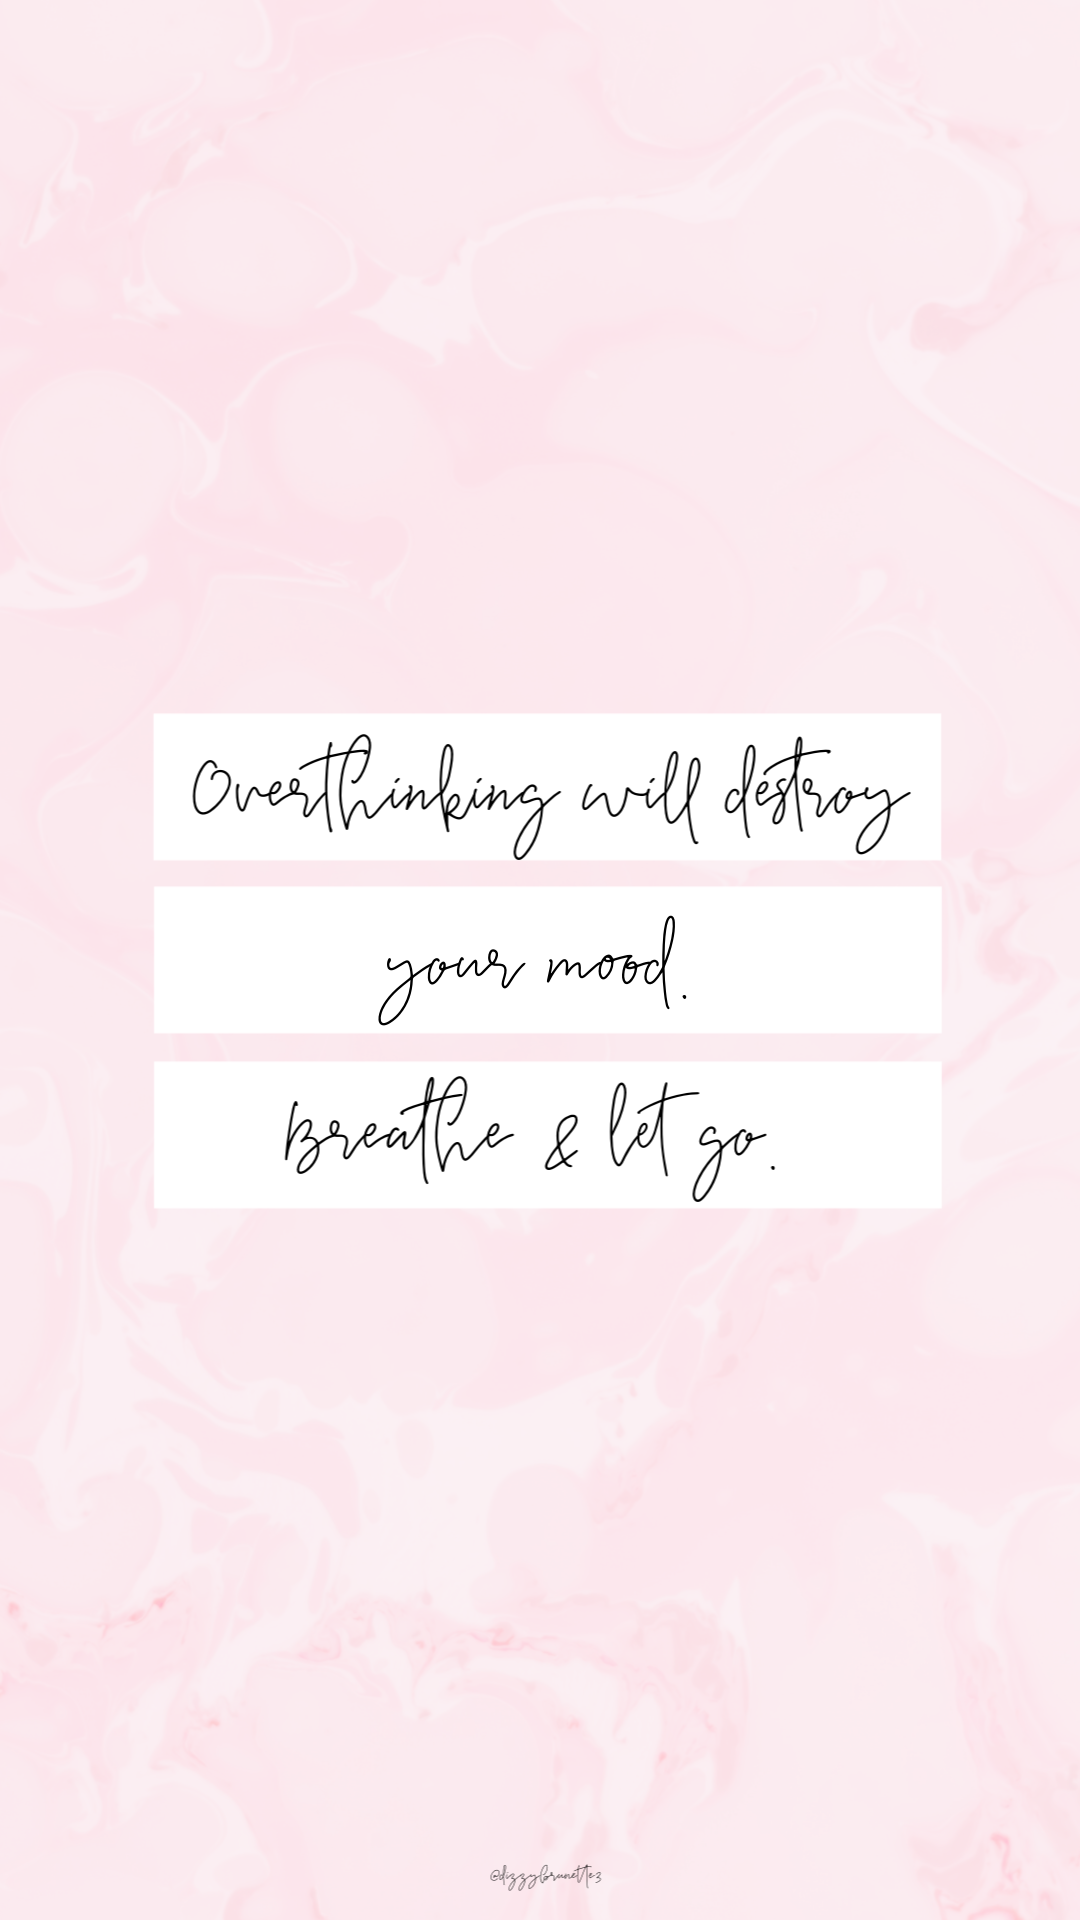 Overthinking Wallpapers